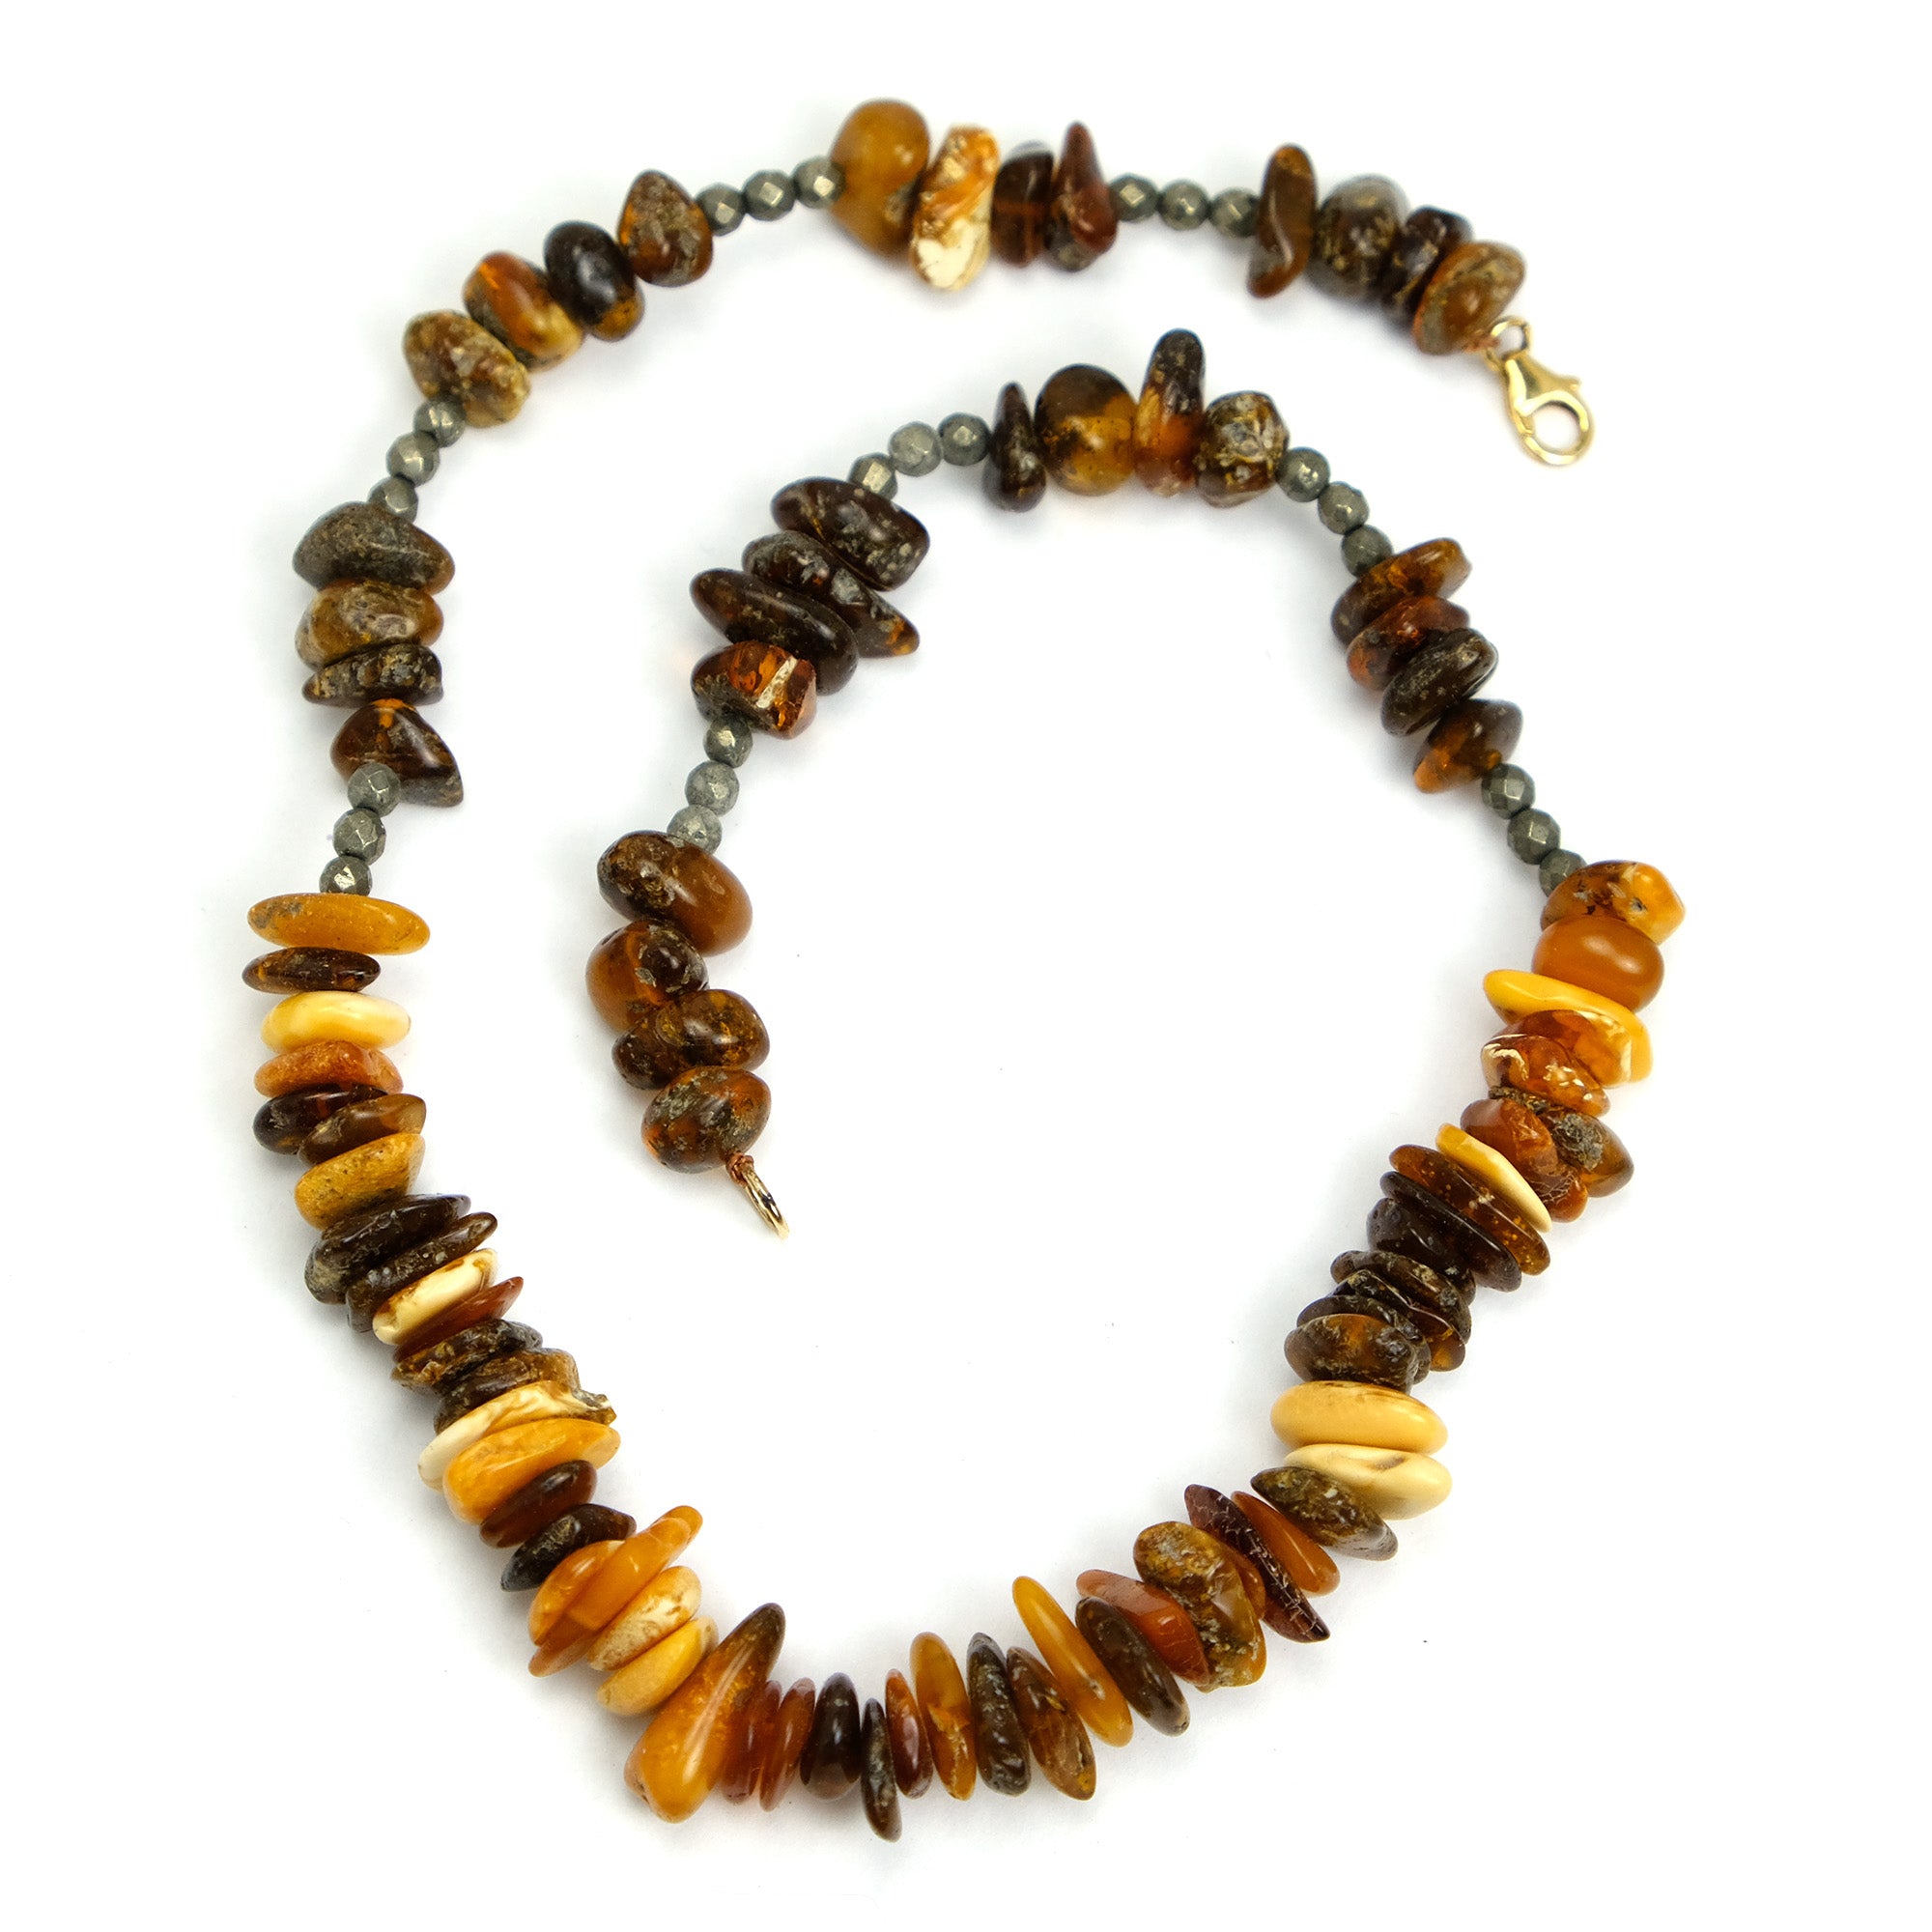 Amber necklace BD298. India.